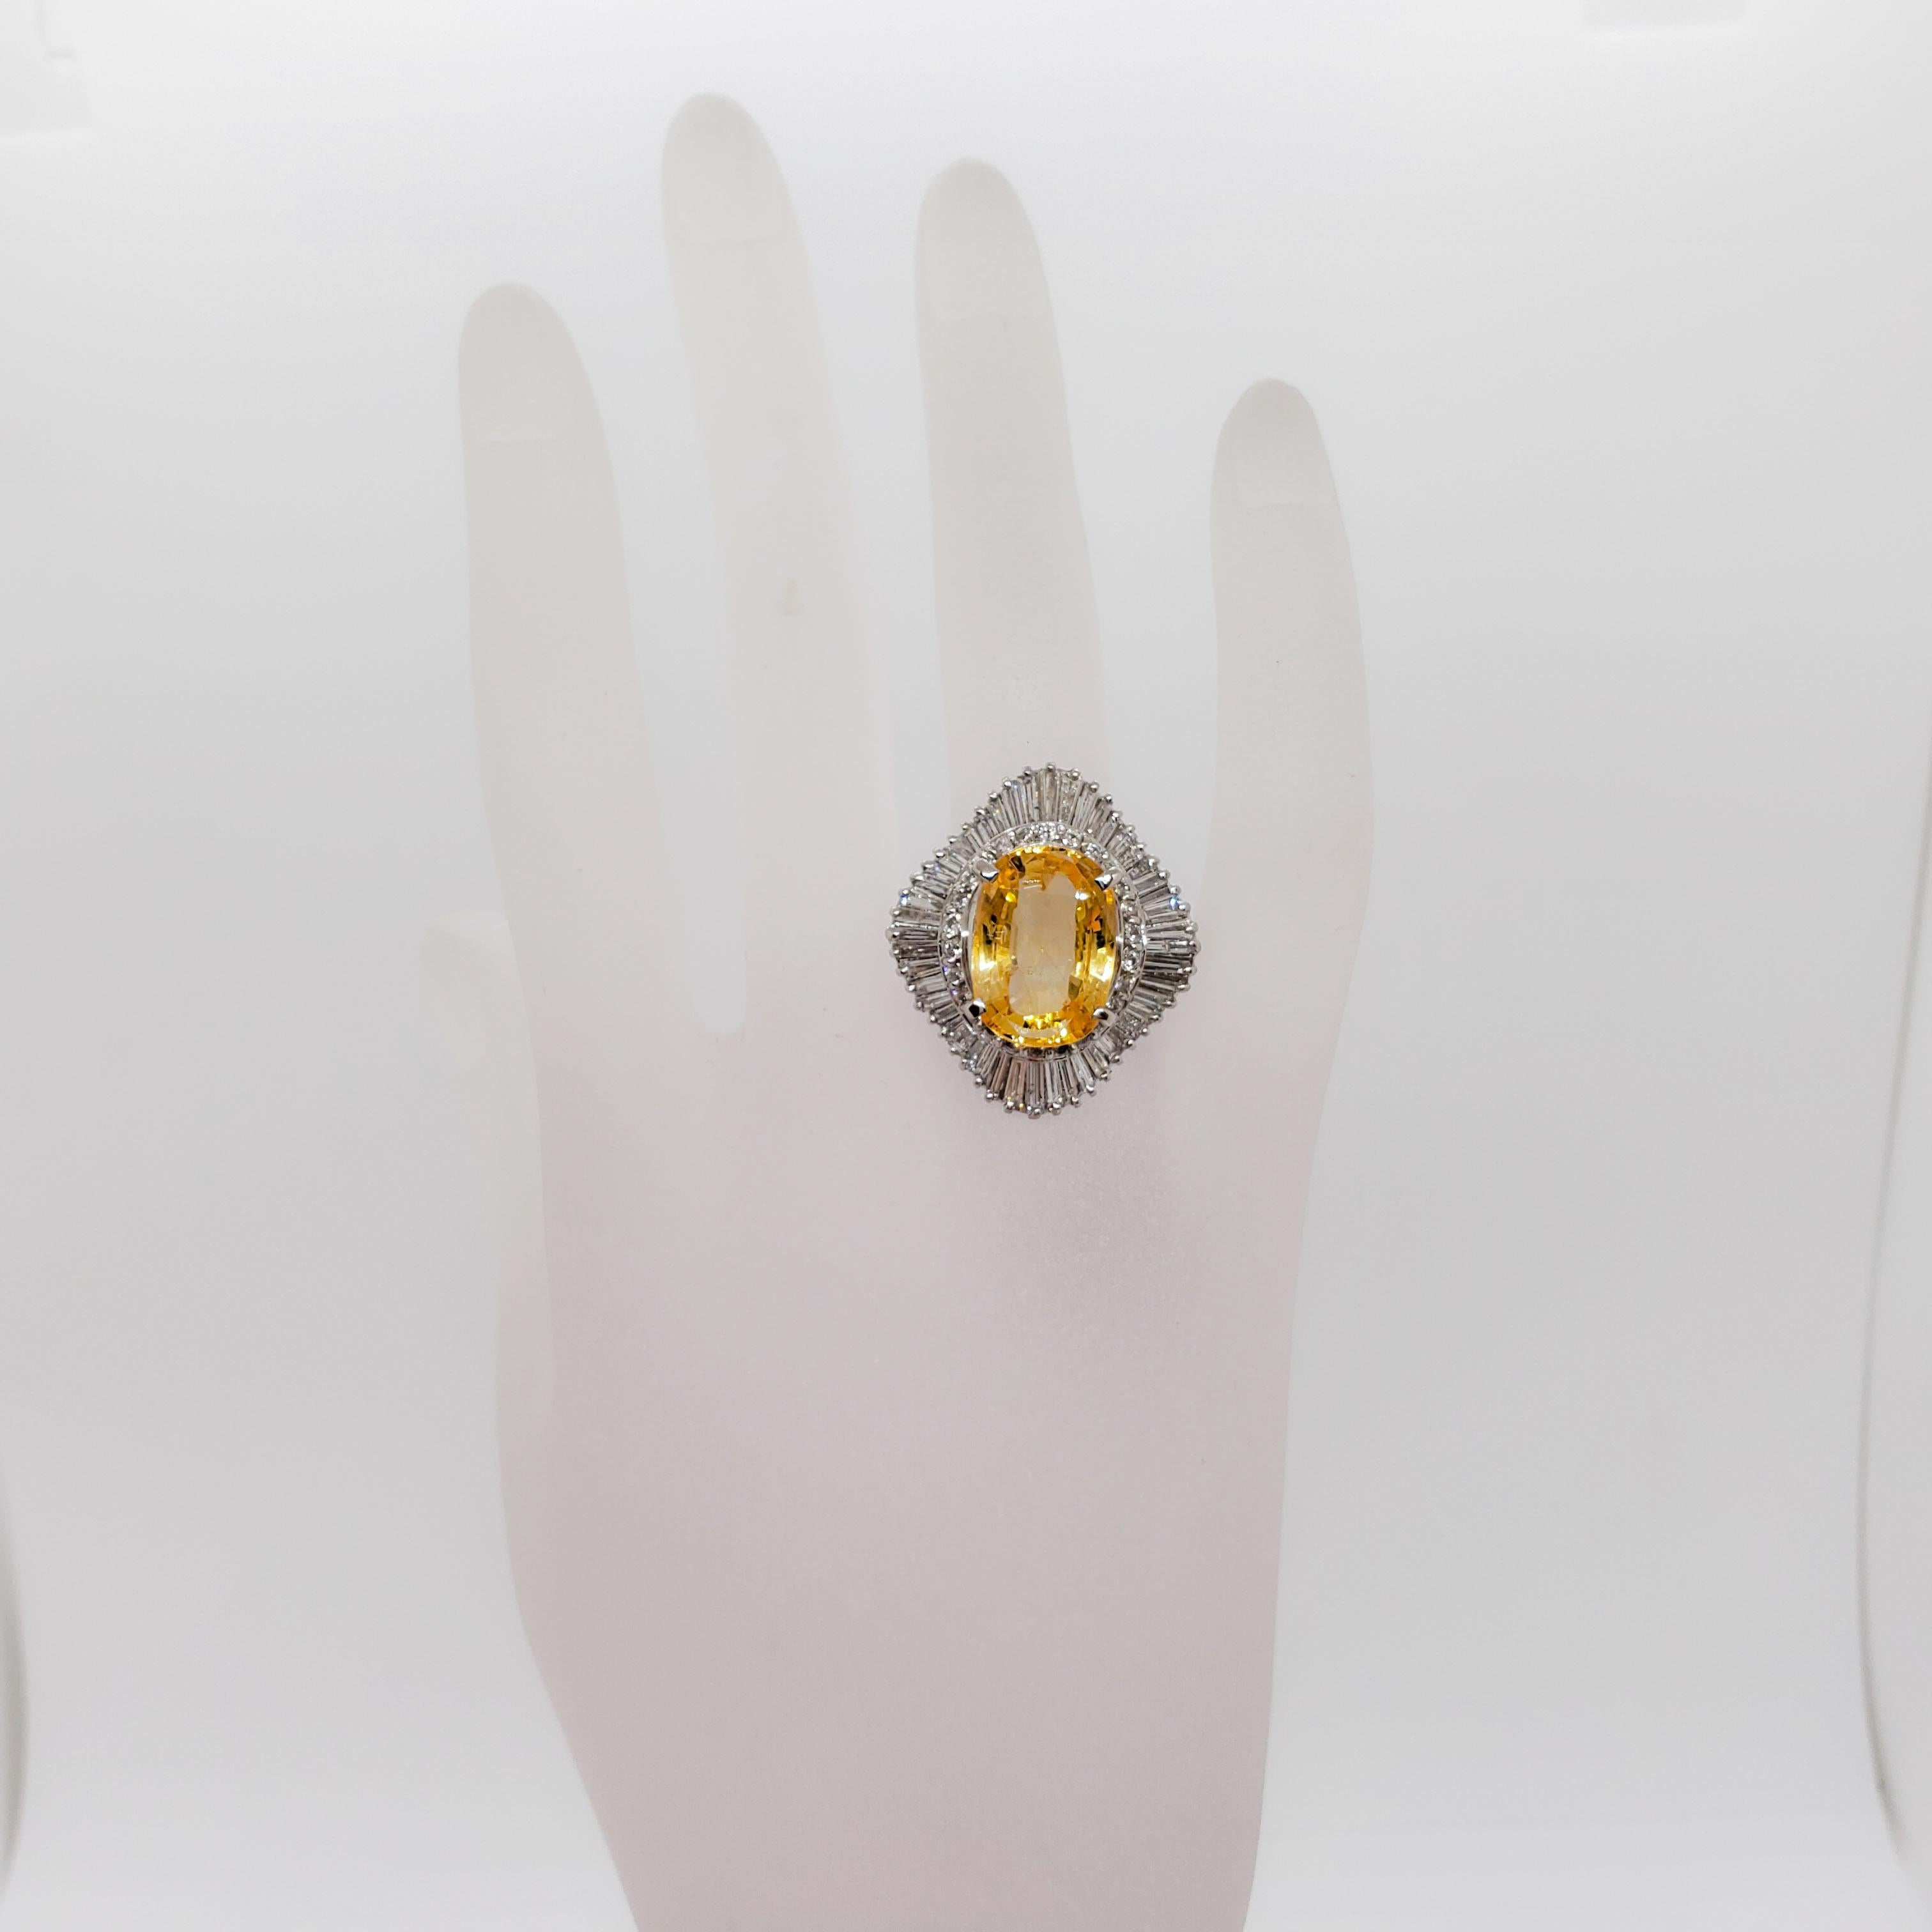 Stunning estate ring featuring a bright sunshine yellow 9.69 ct. yellow sapphire cushion with 2.45 ct. of good quality, white, and bright diamond rounds and baguettes.  Classic handmade design in platinum.  Ring size 7.5.  Comes with GIA report. 